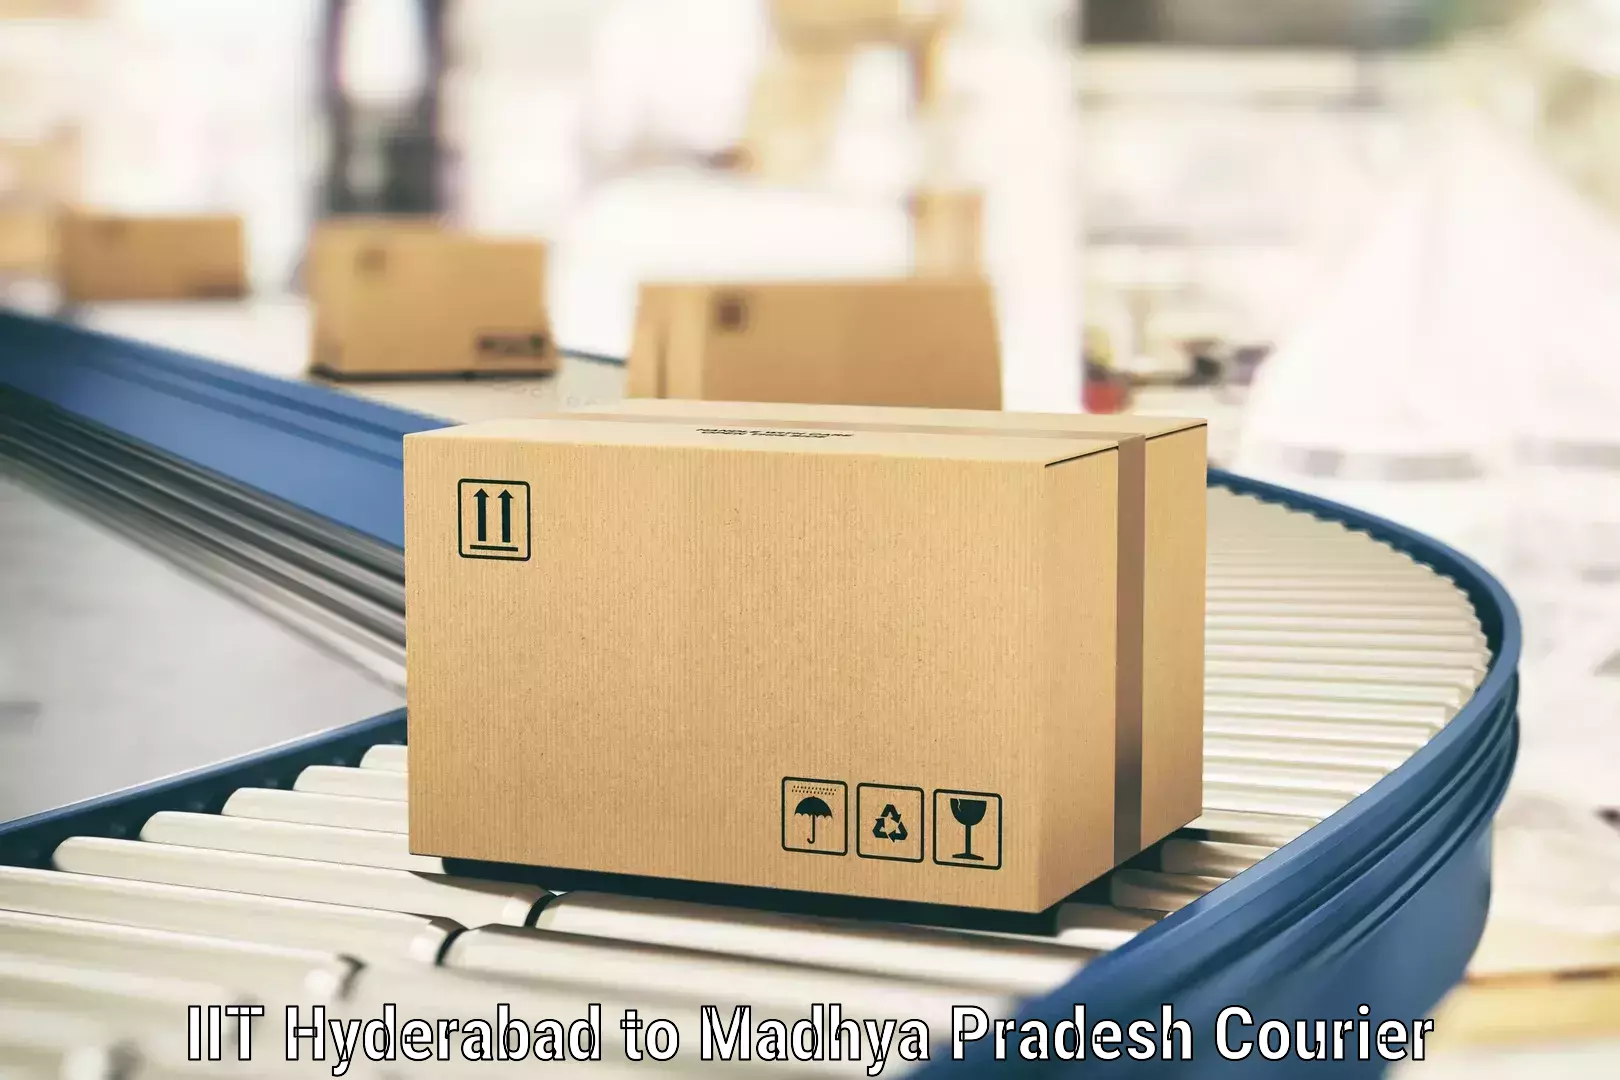 Full-service courier options IIT Hyderabad to Silwani